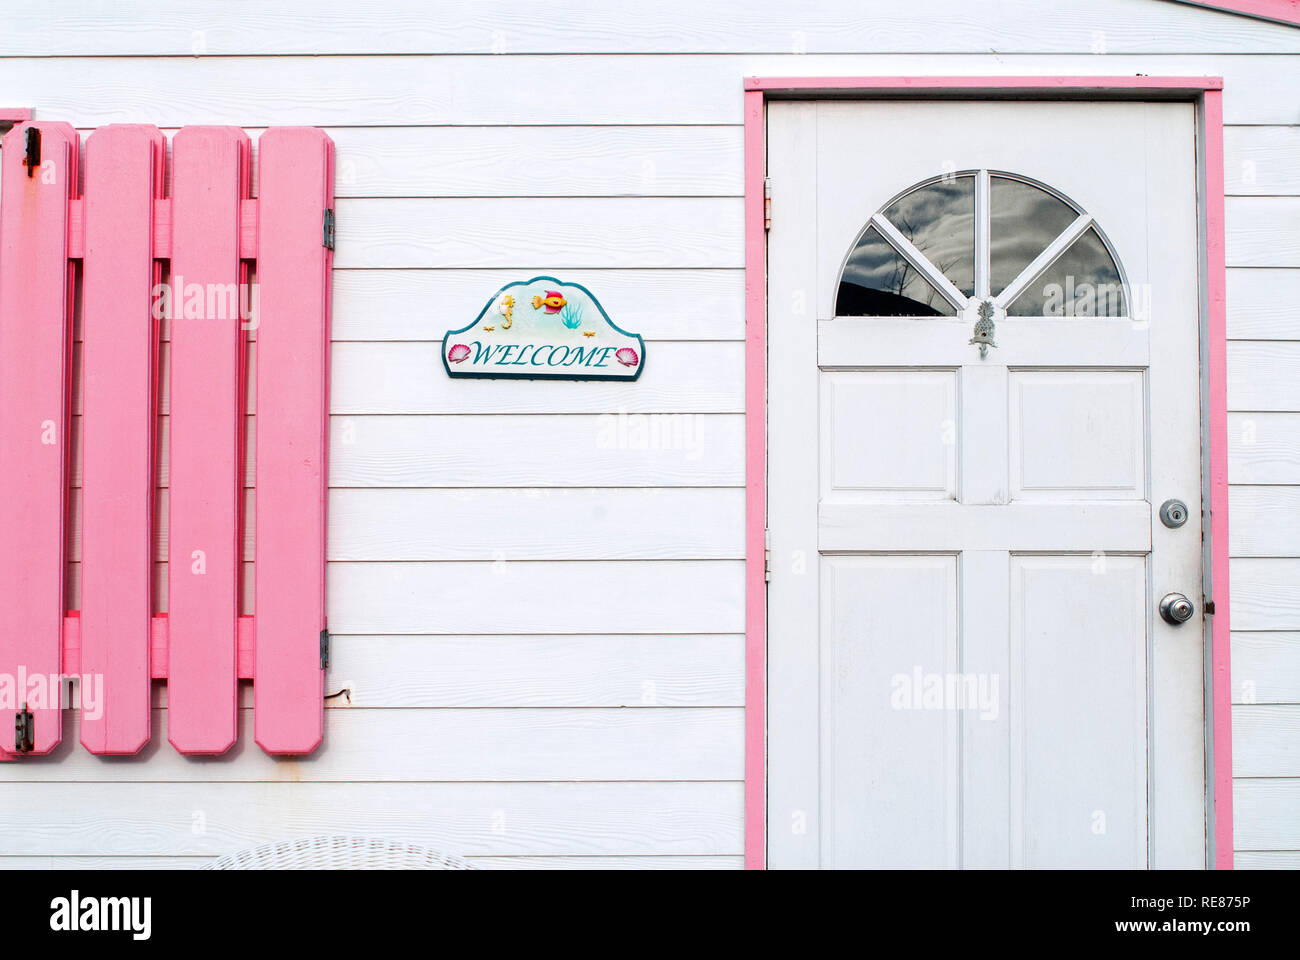 Typical loyalist house, Hope Town, Elbow Cay, Abacos. Bahamas Stock Photo